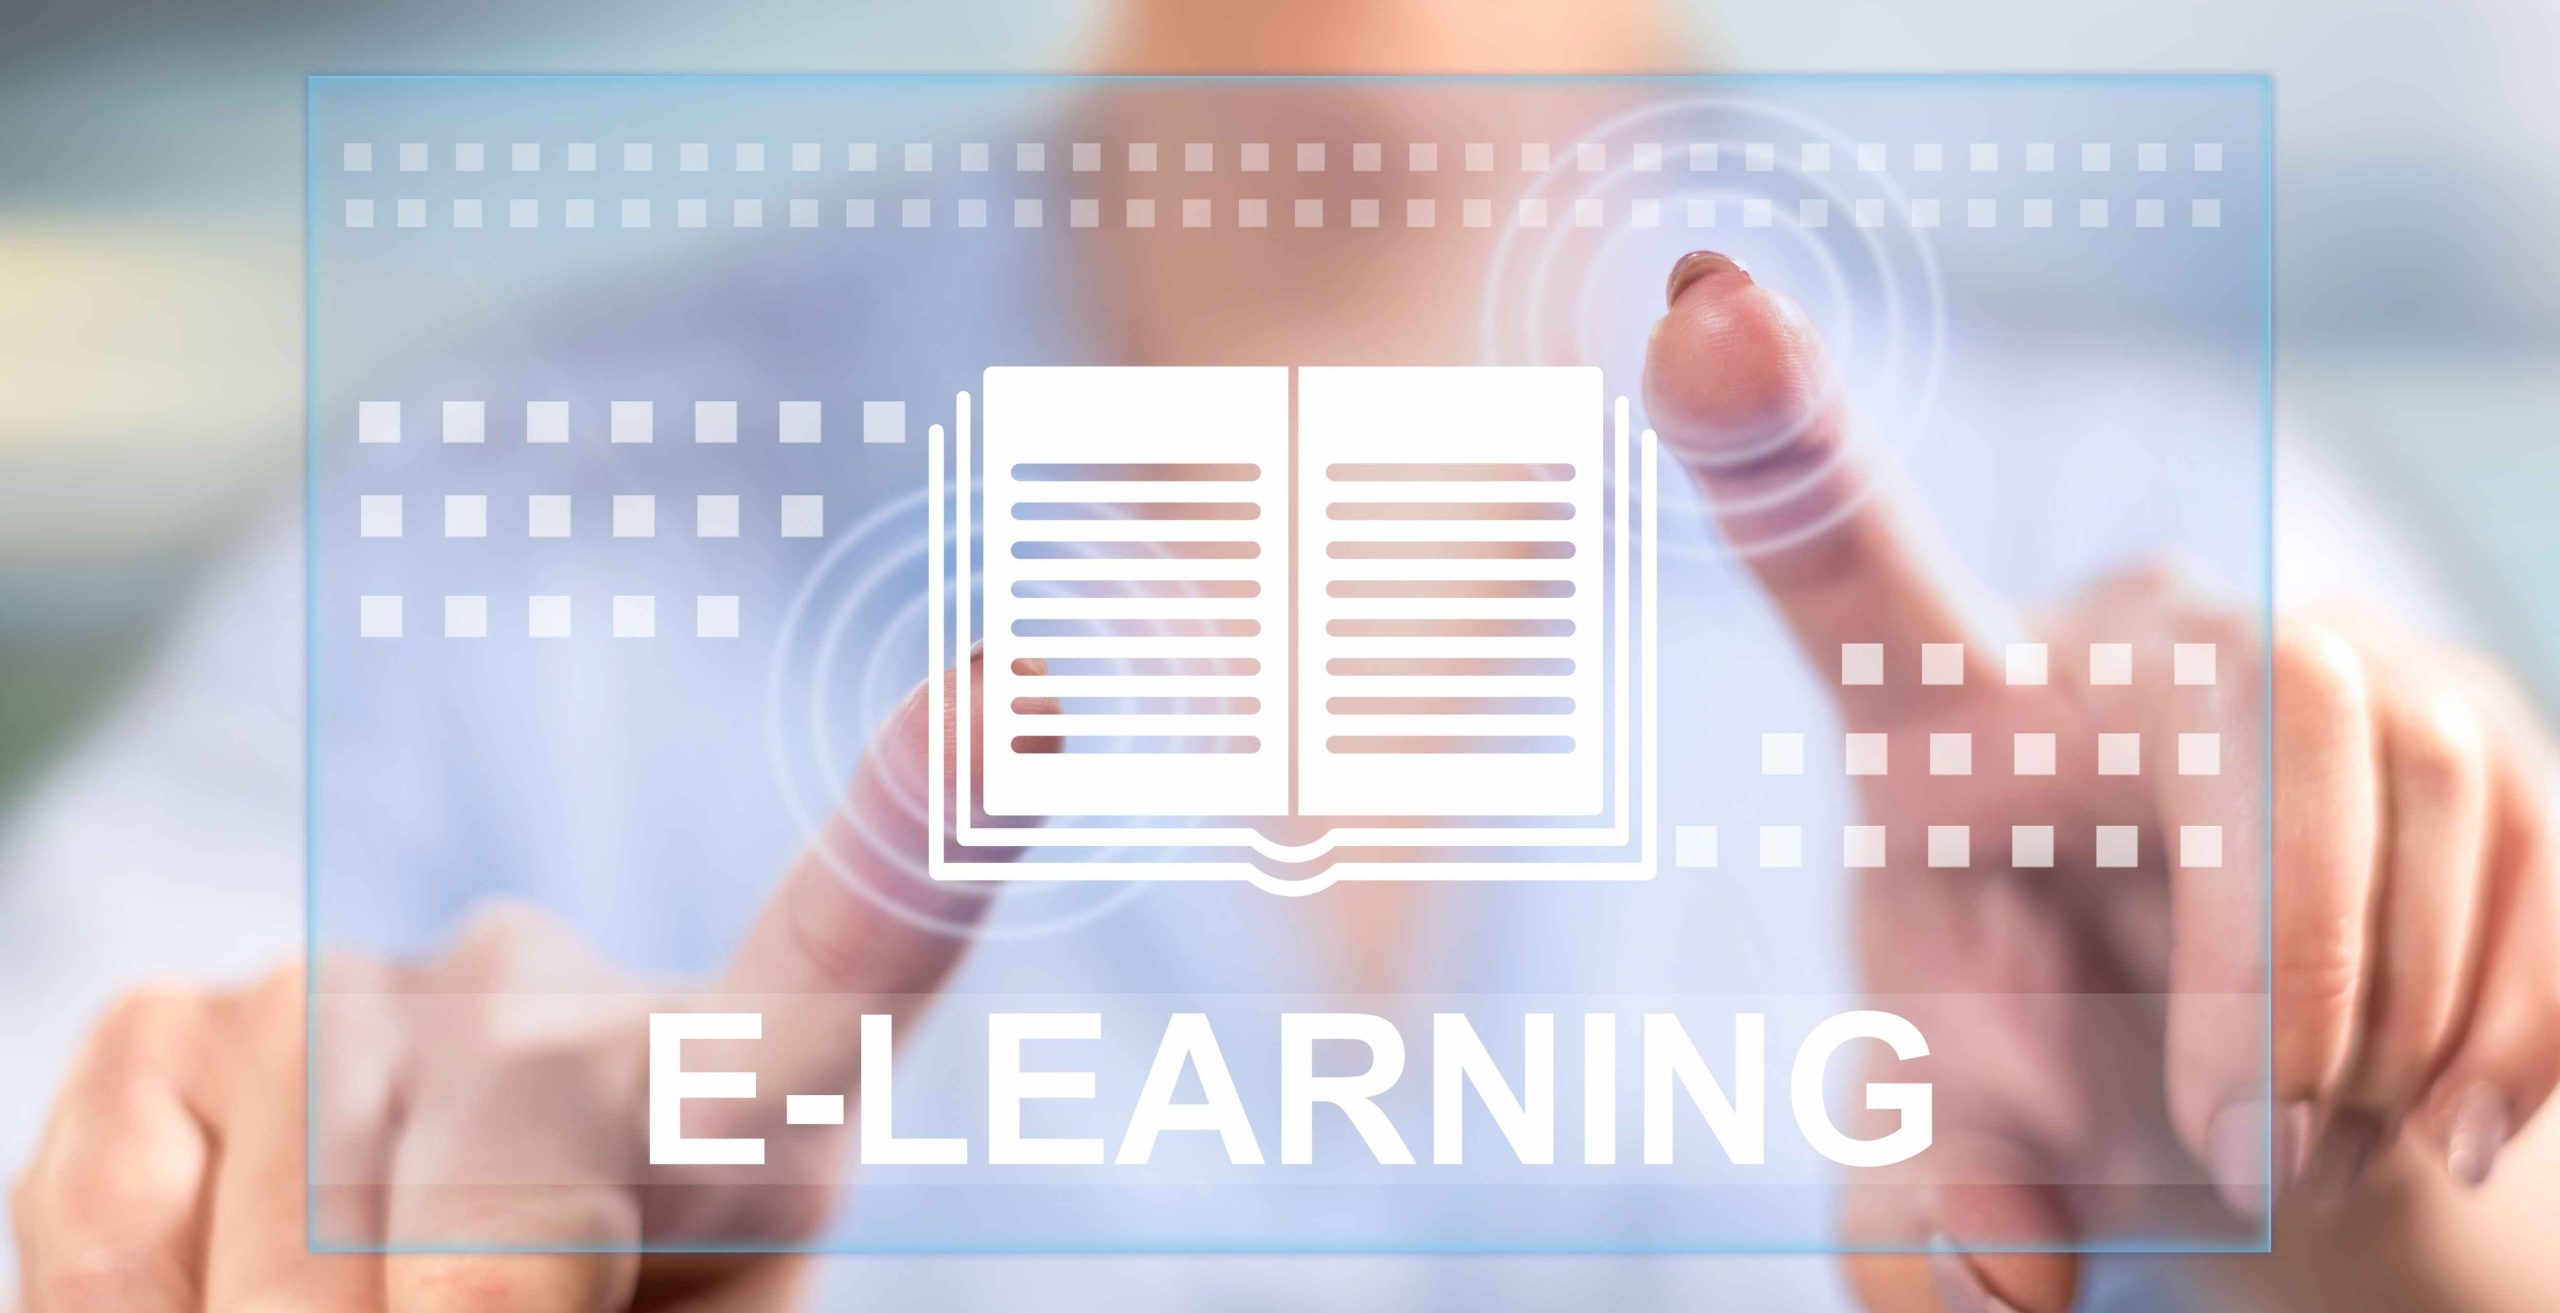 the word elearning on screen with a person trying to engage with it